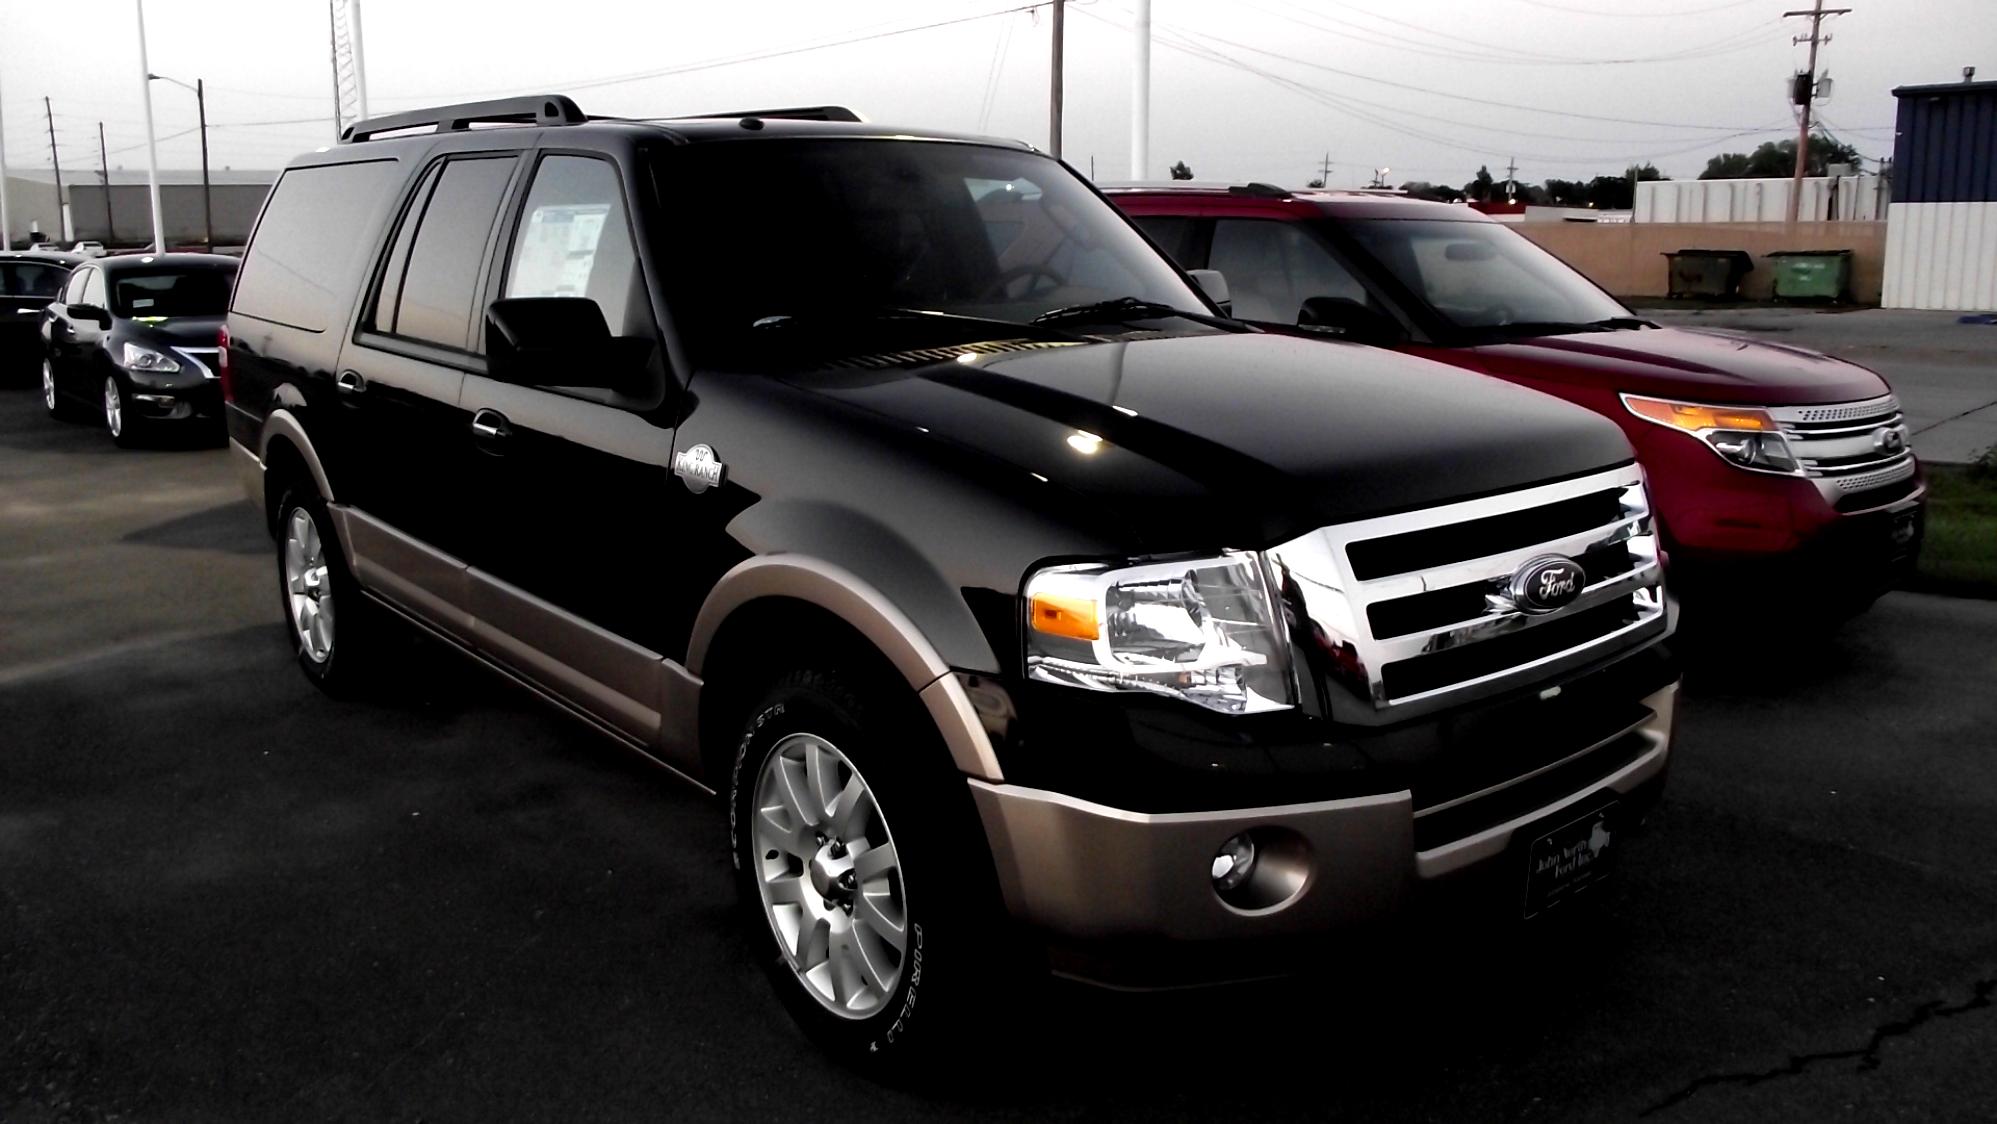 Ford Expedition 2007 #2